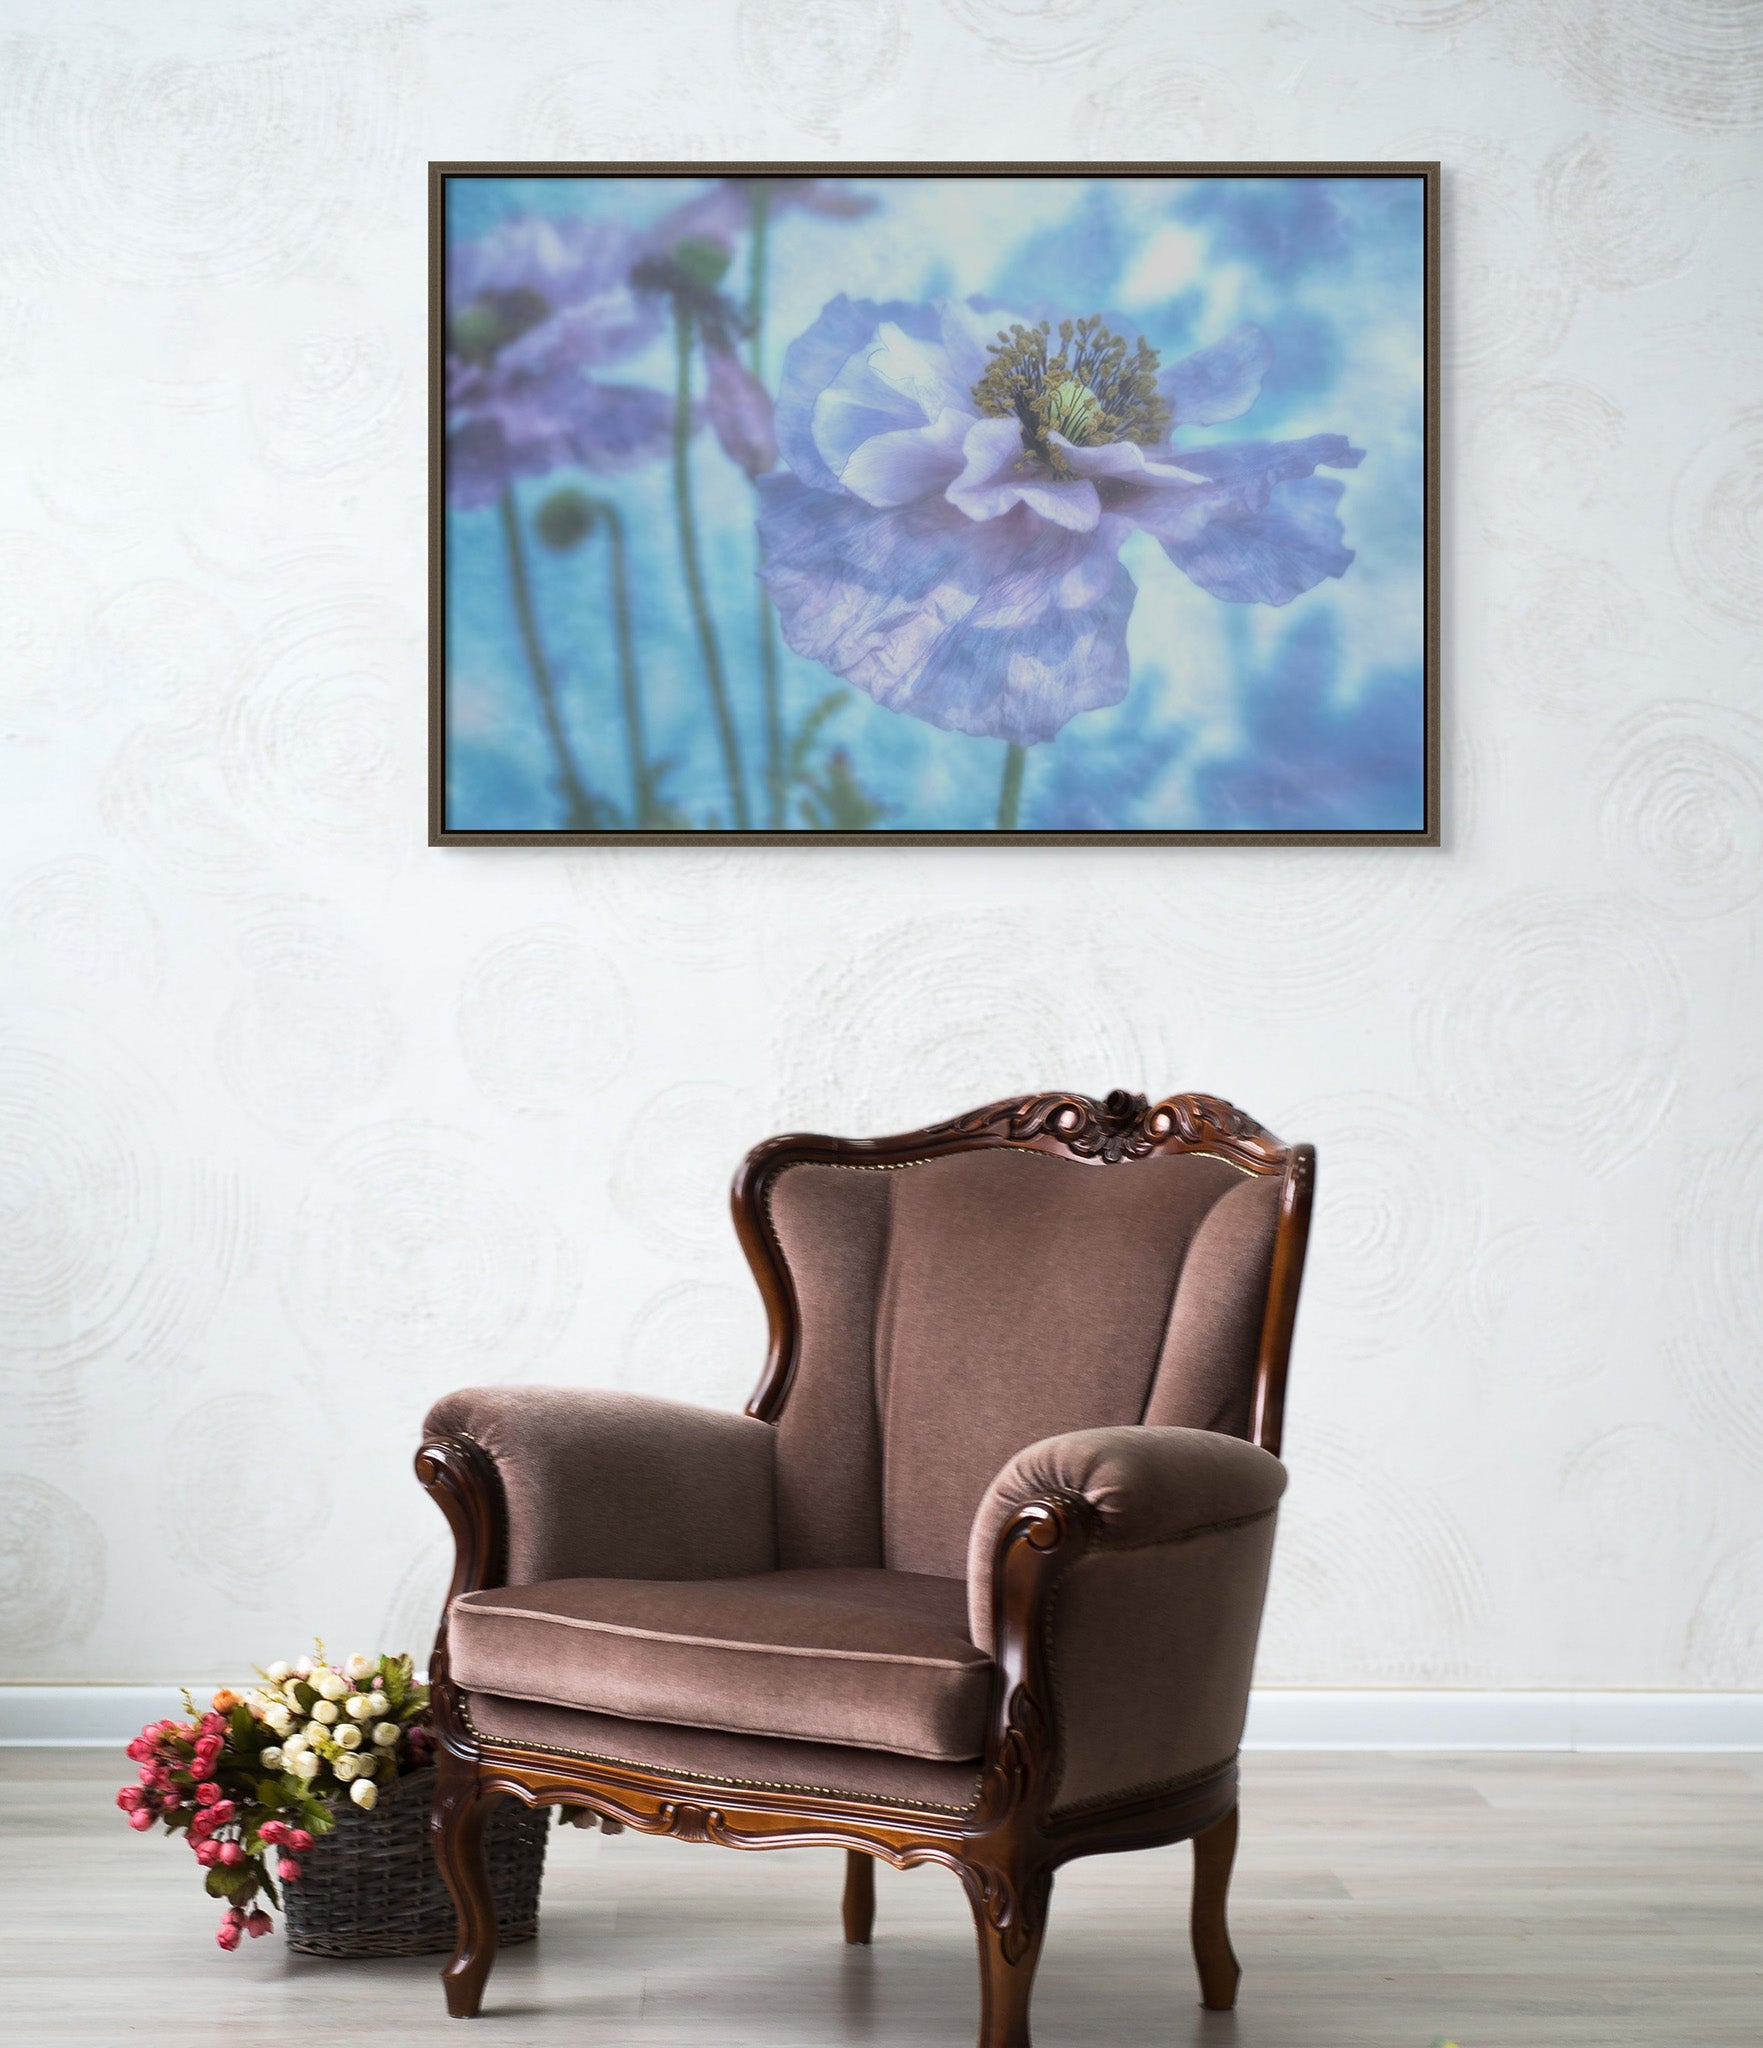 Room with a chair and a basket of flowers. There is picture in a floating frame on the wall. The picture is a metal print of "Ethereal Beauty" by Cameron Dreaux of Dreaux Fine Art. The print is a photograph of blue poppies. 